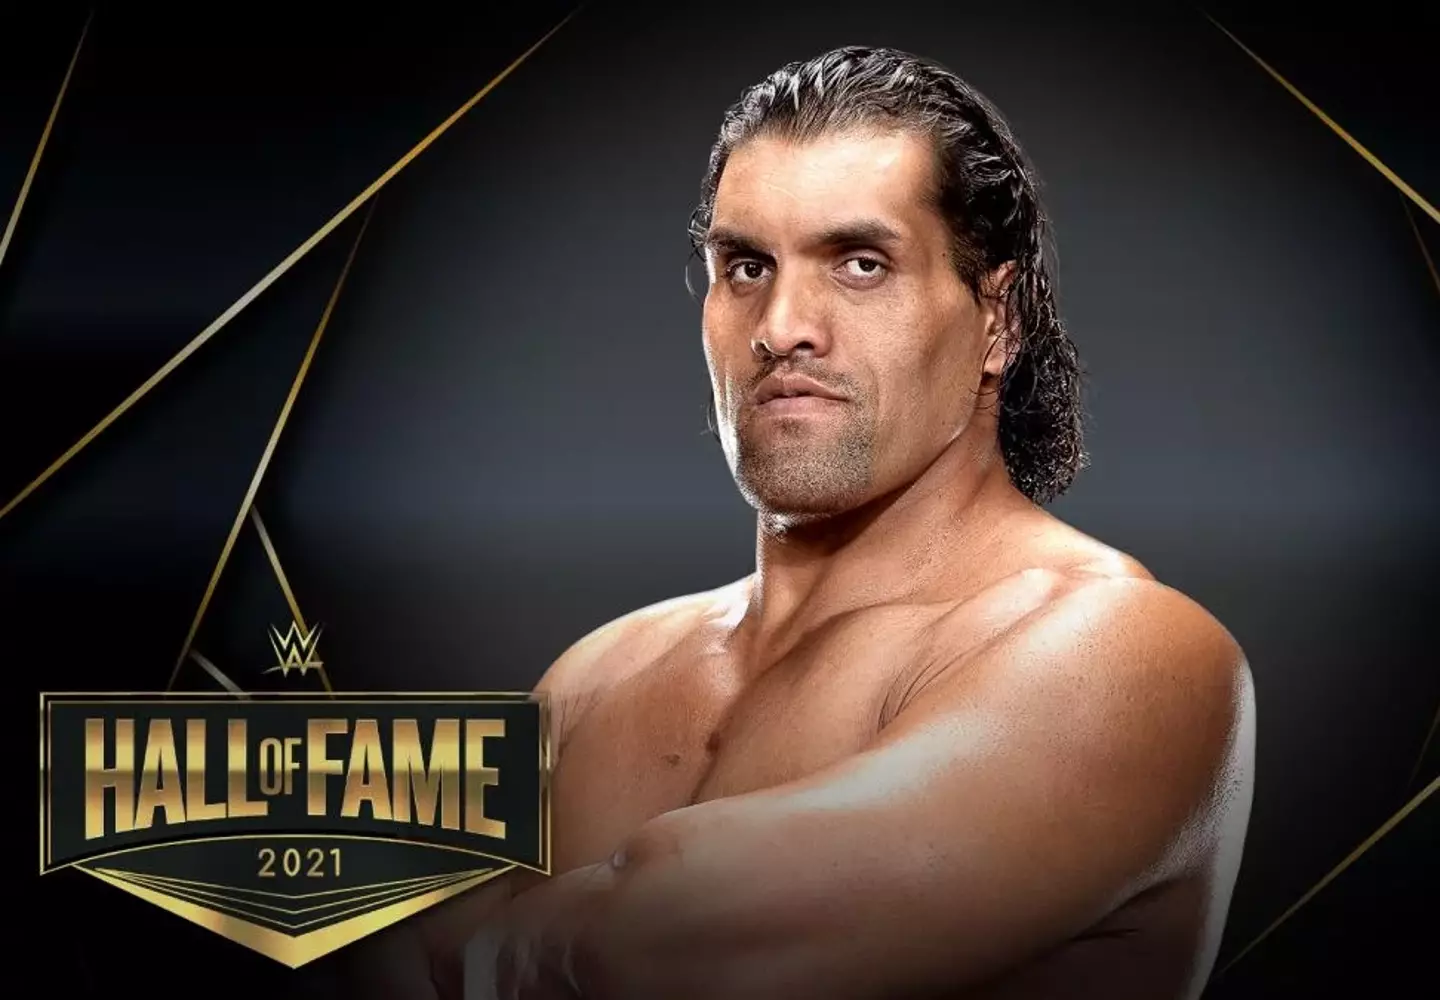 WWE nominated the star into their Hall of Fame last year.